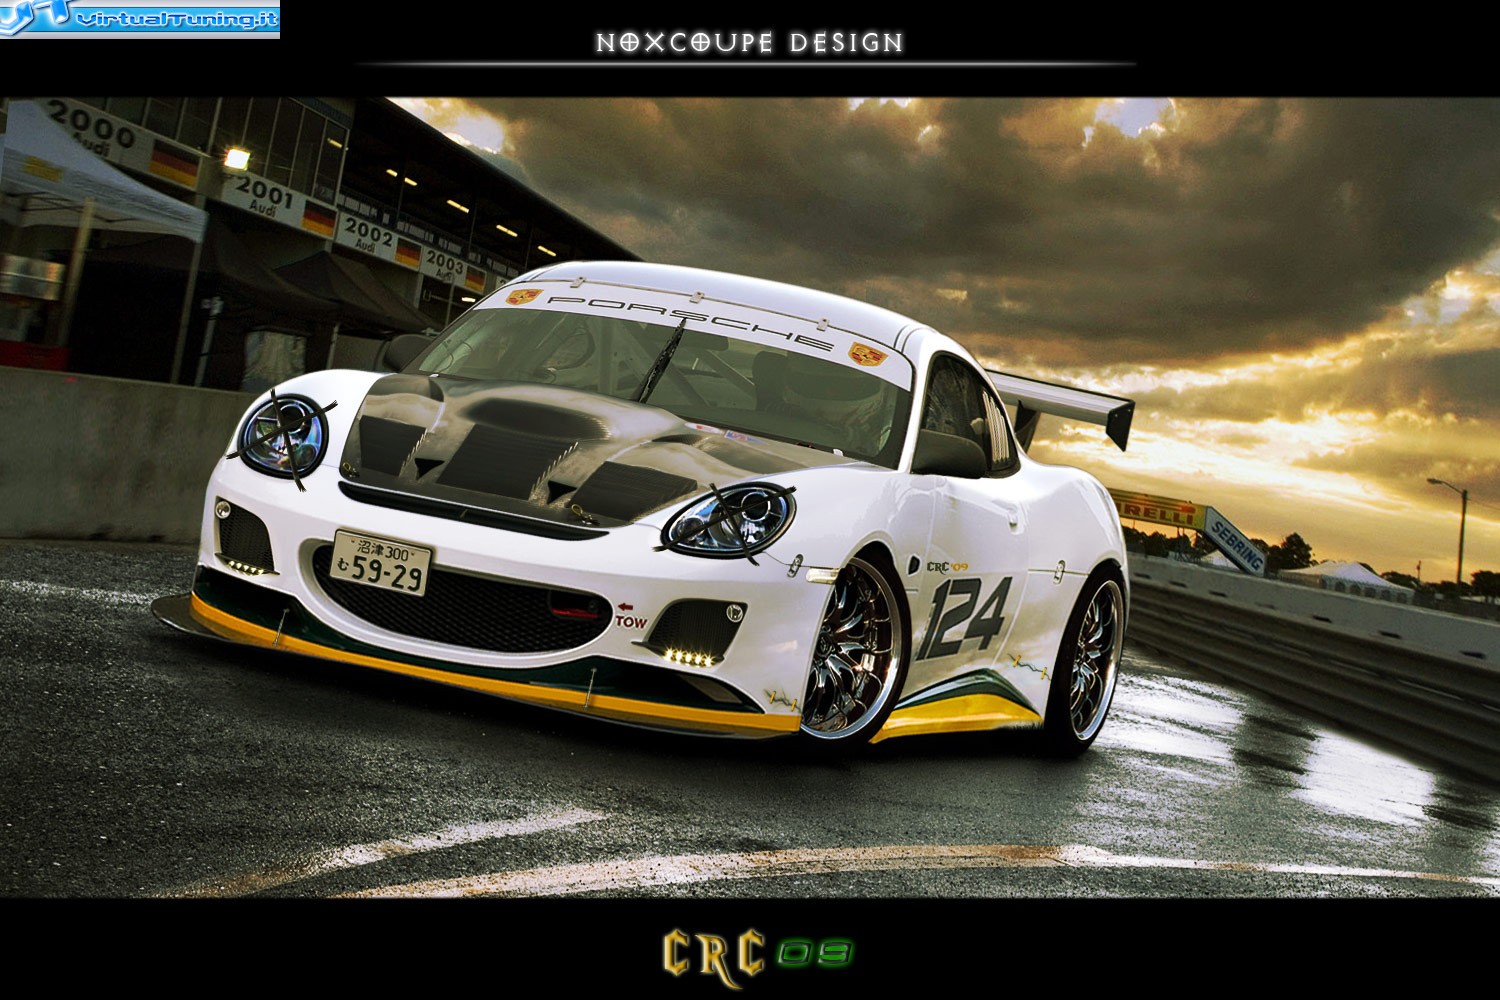 VirtualTuning PORSCHE Cayman by Noxcoupe